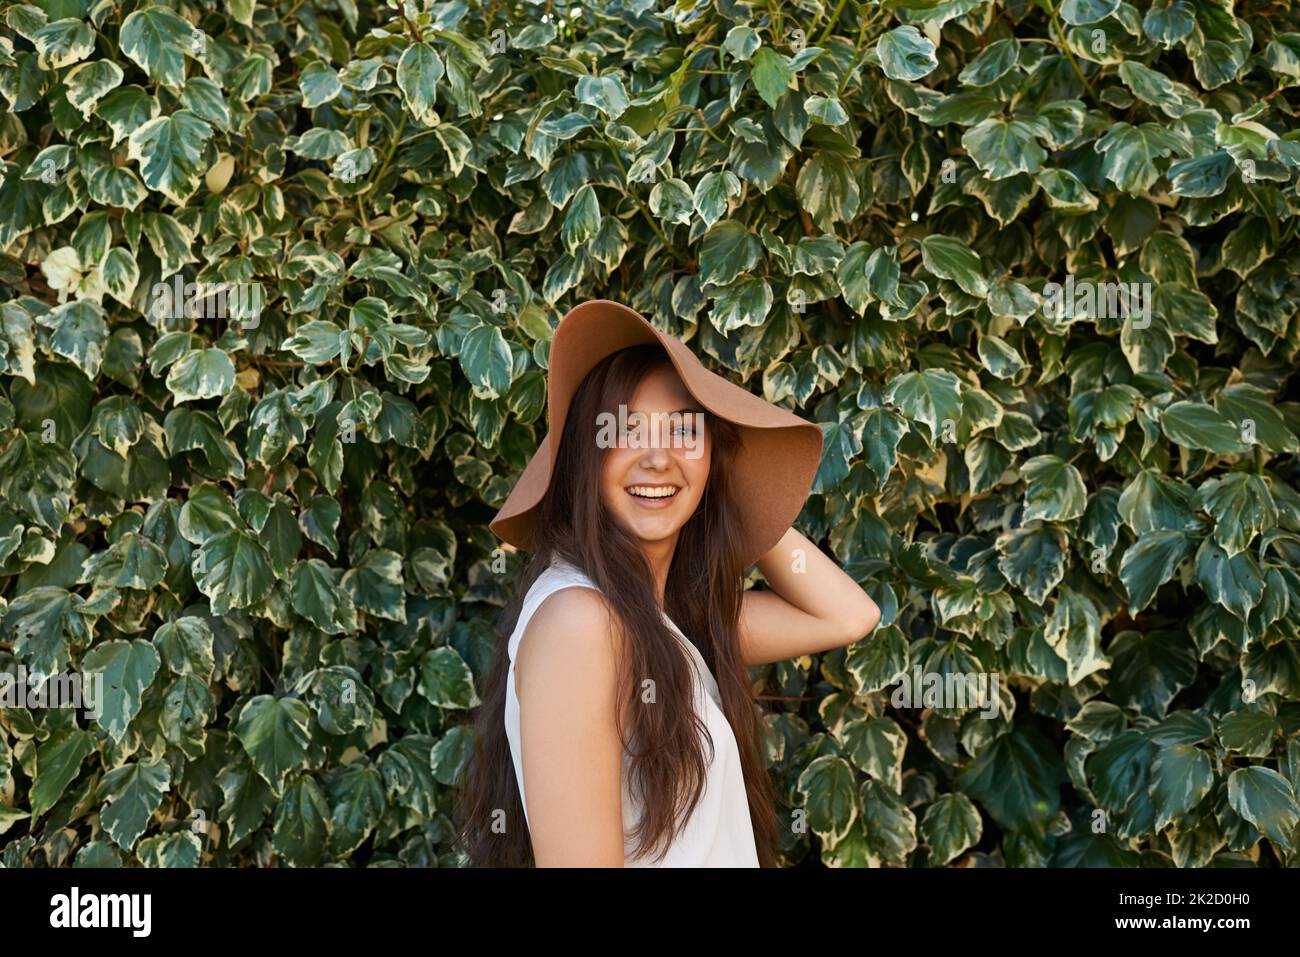 Hats are part of my style. Cropped portrait of a pretty teenage girl standing in front of a large hedge. Stock Photo